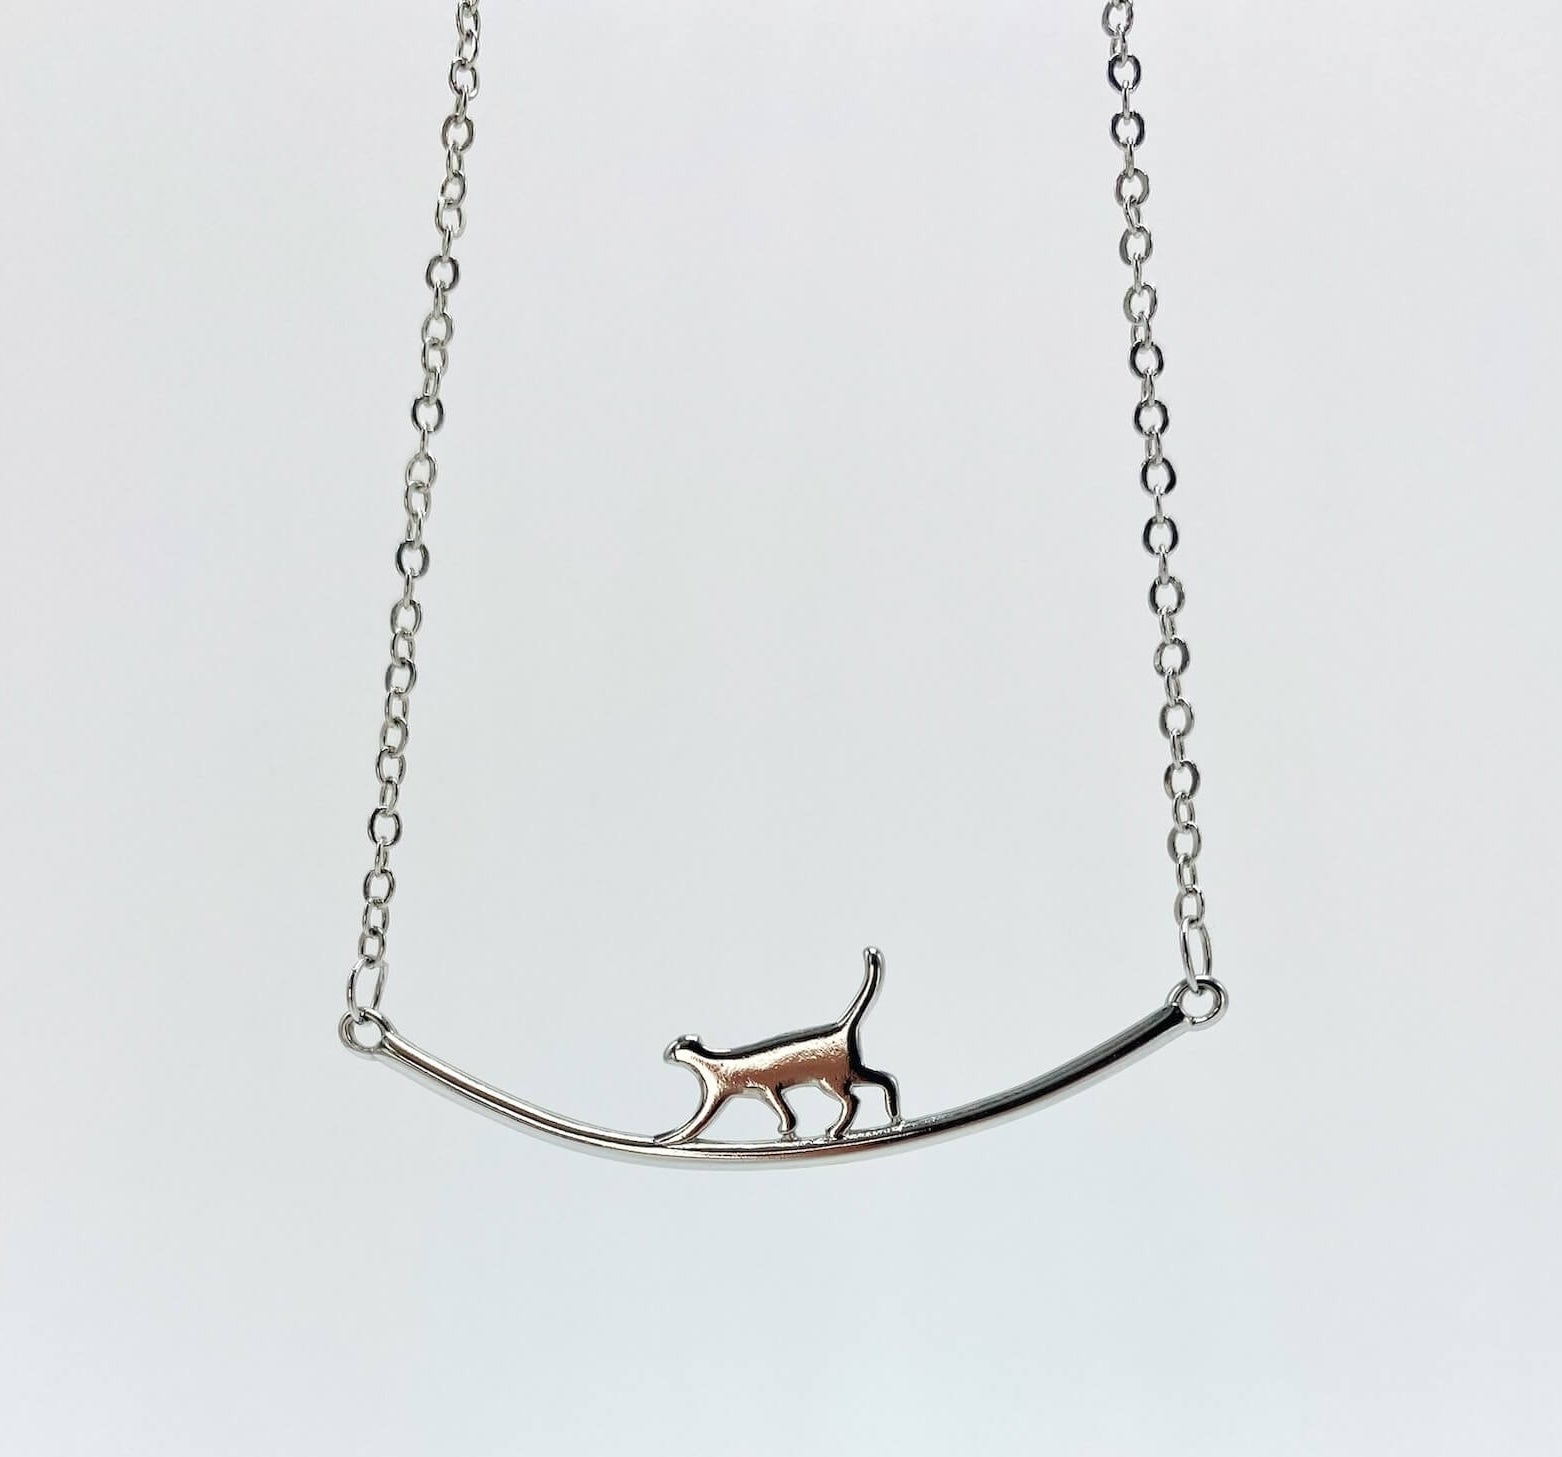 Sterling silver cat walking on bar necklace.